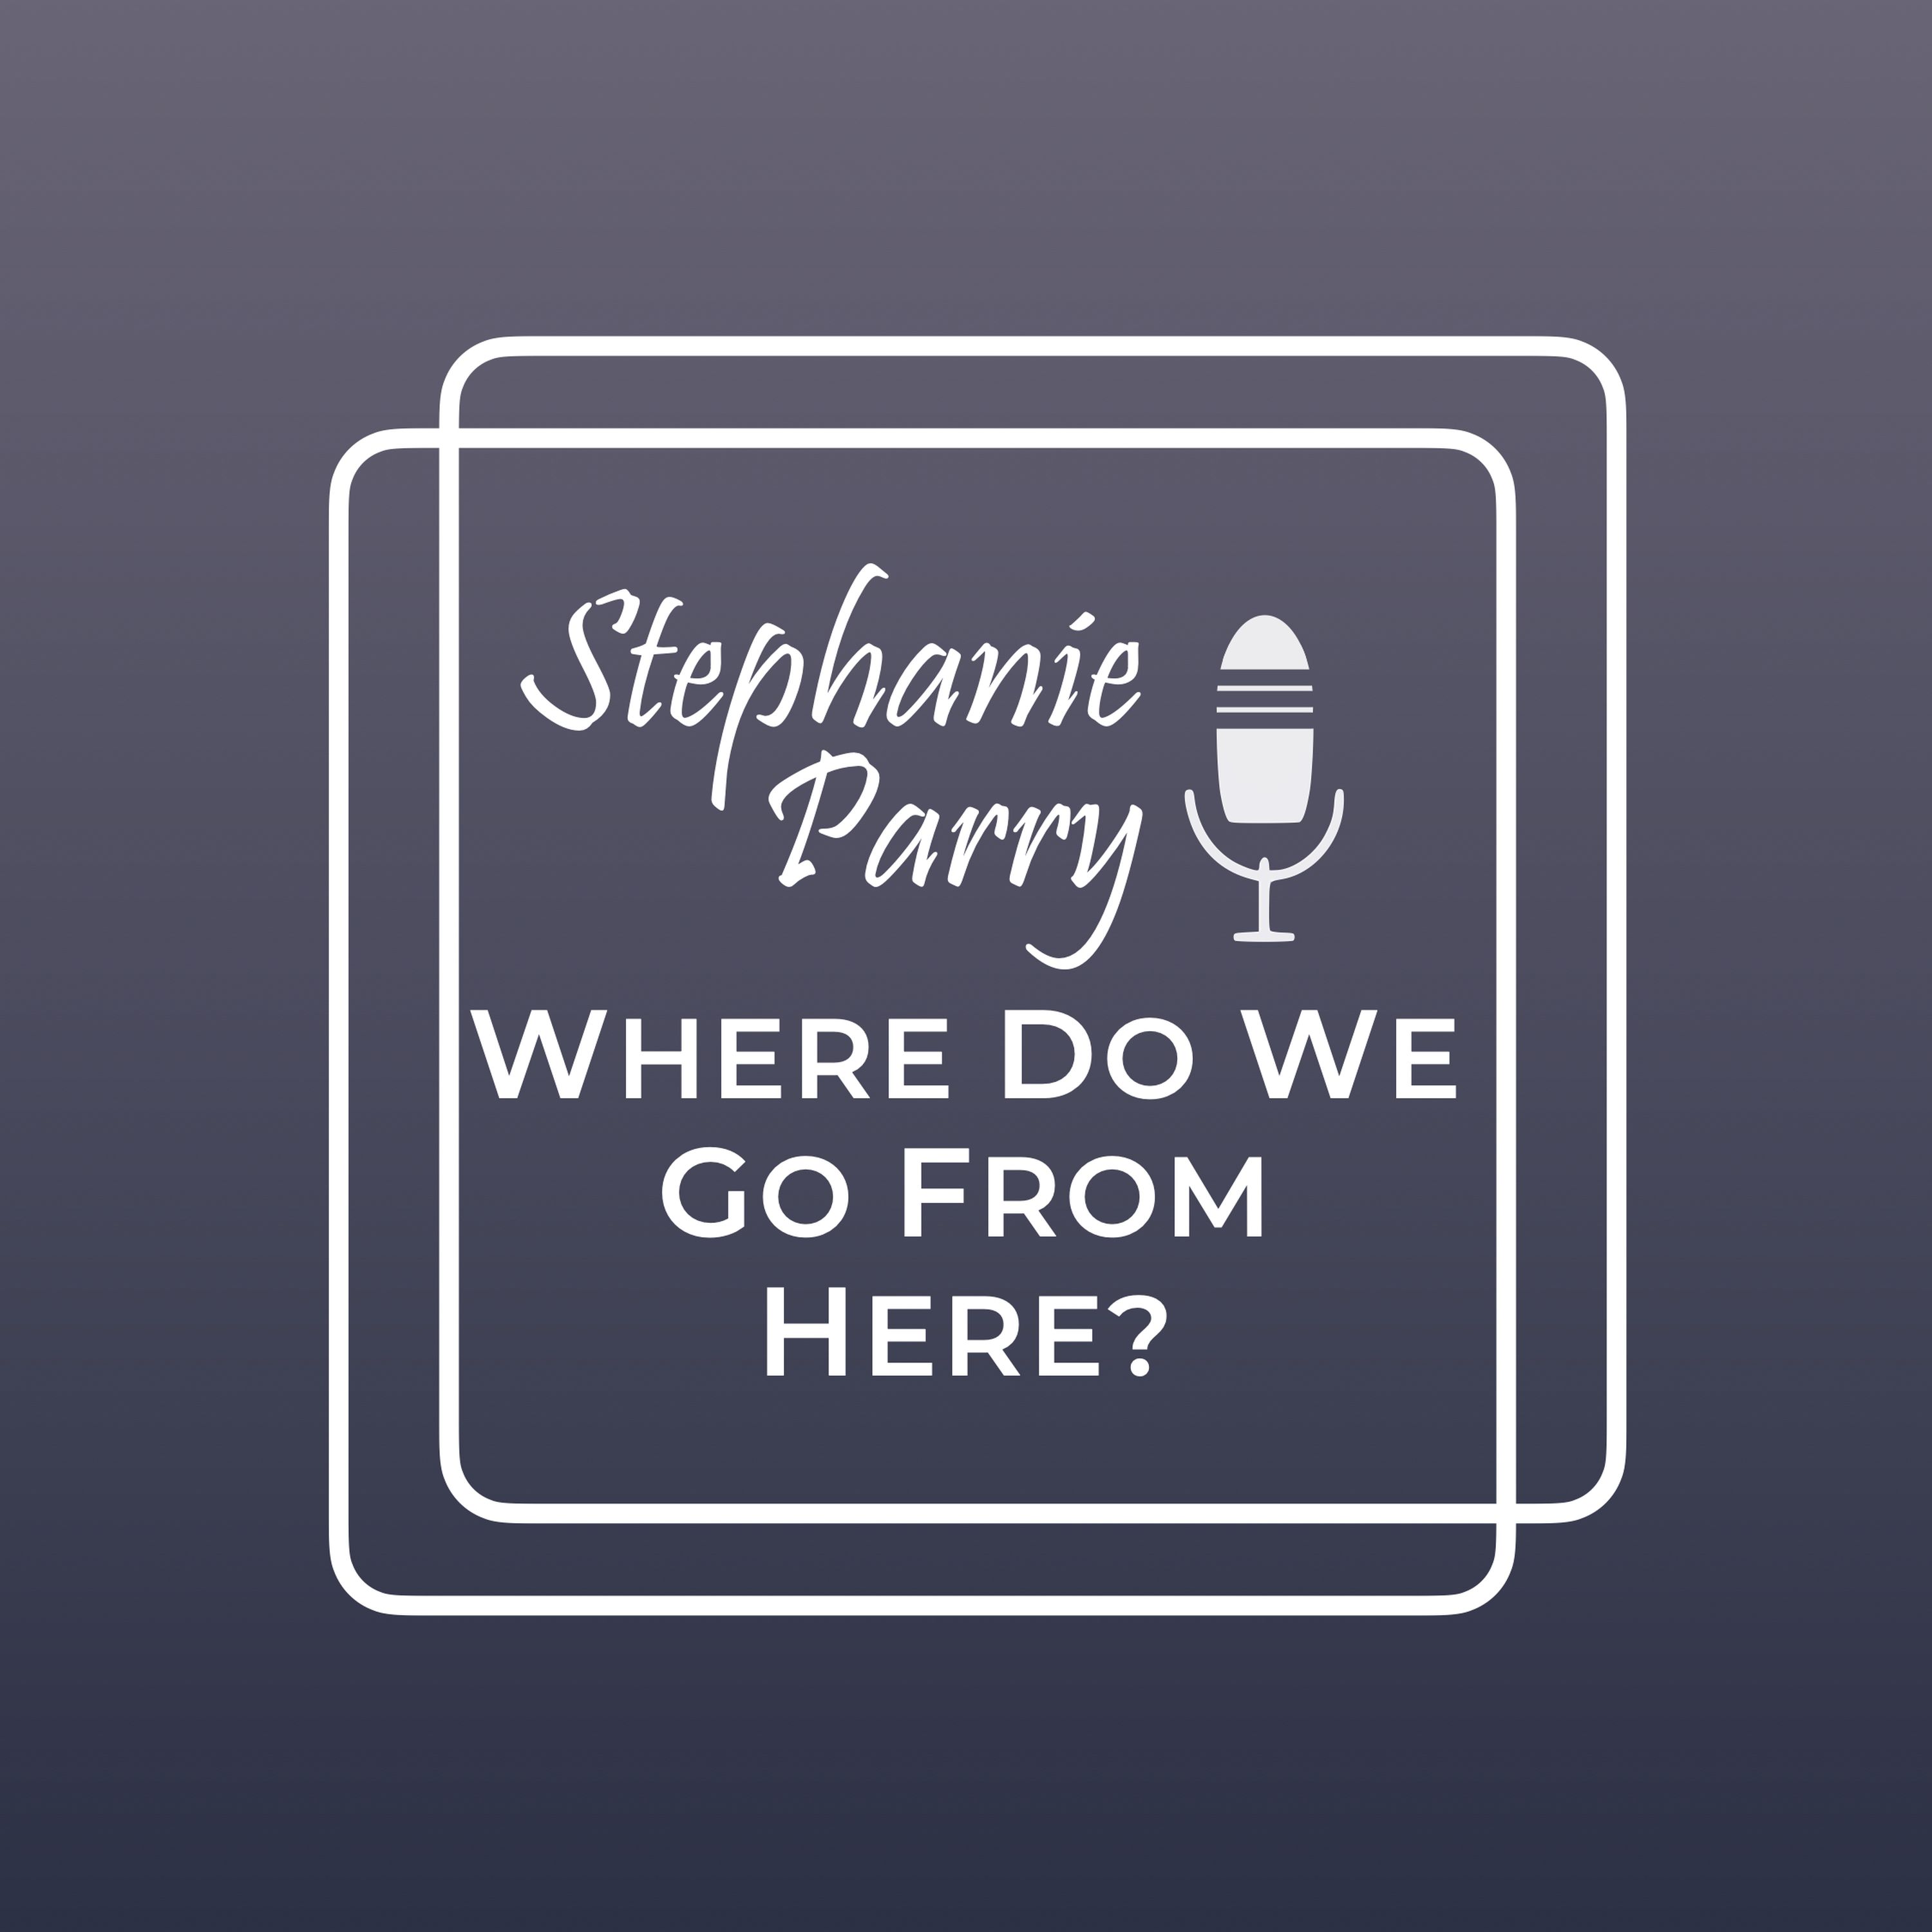 cover art for Where do we go from here? The question, answered.